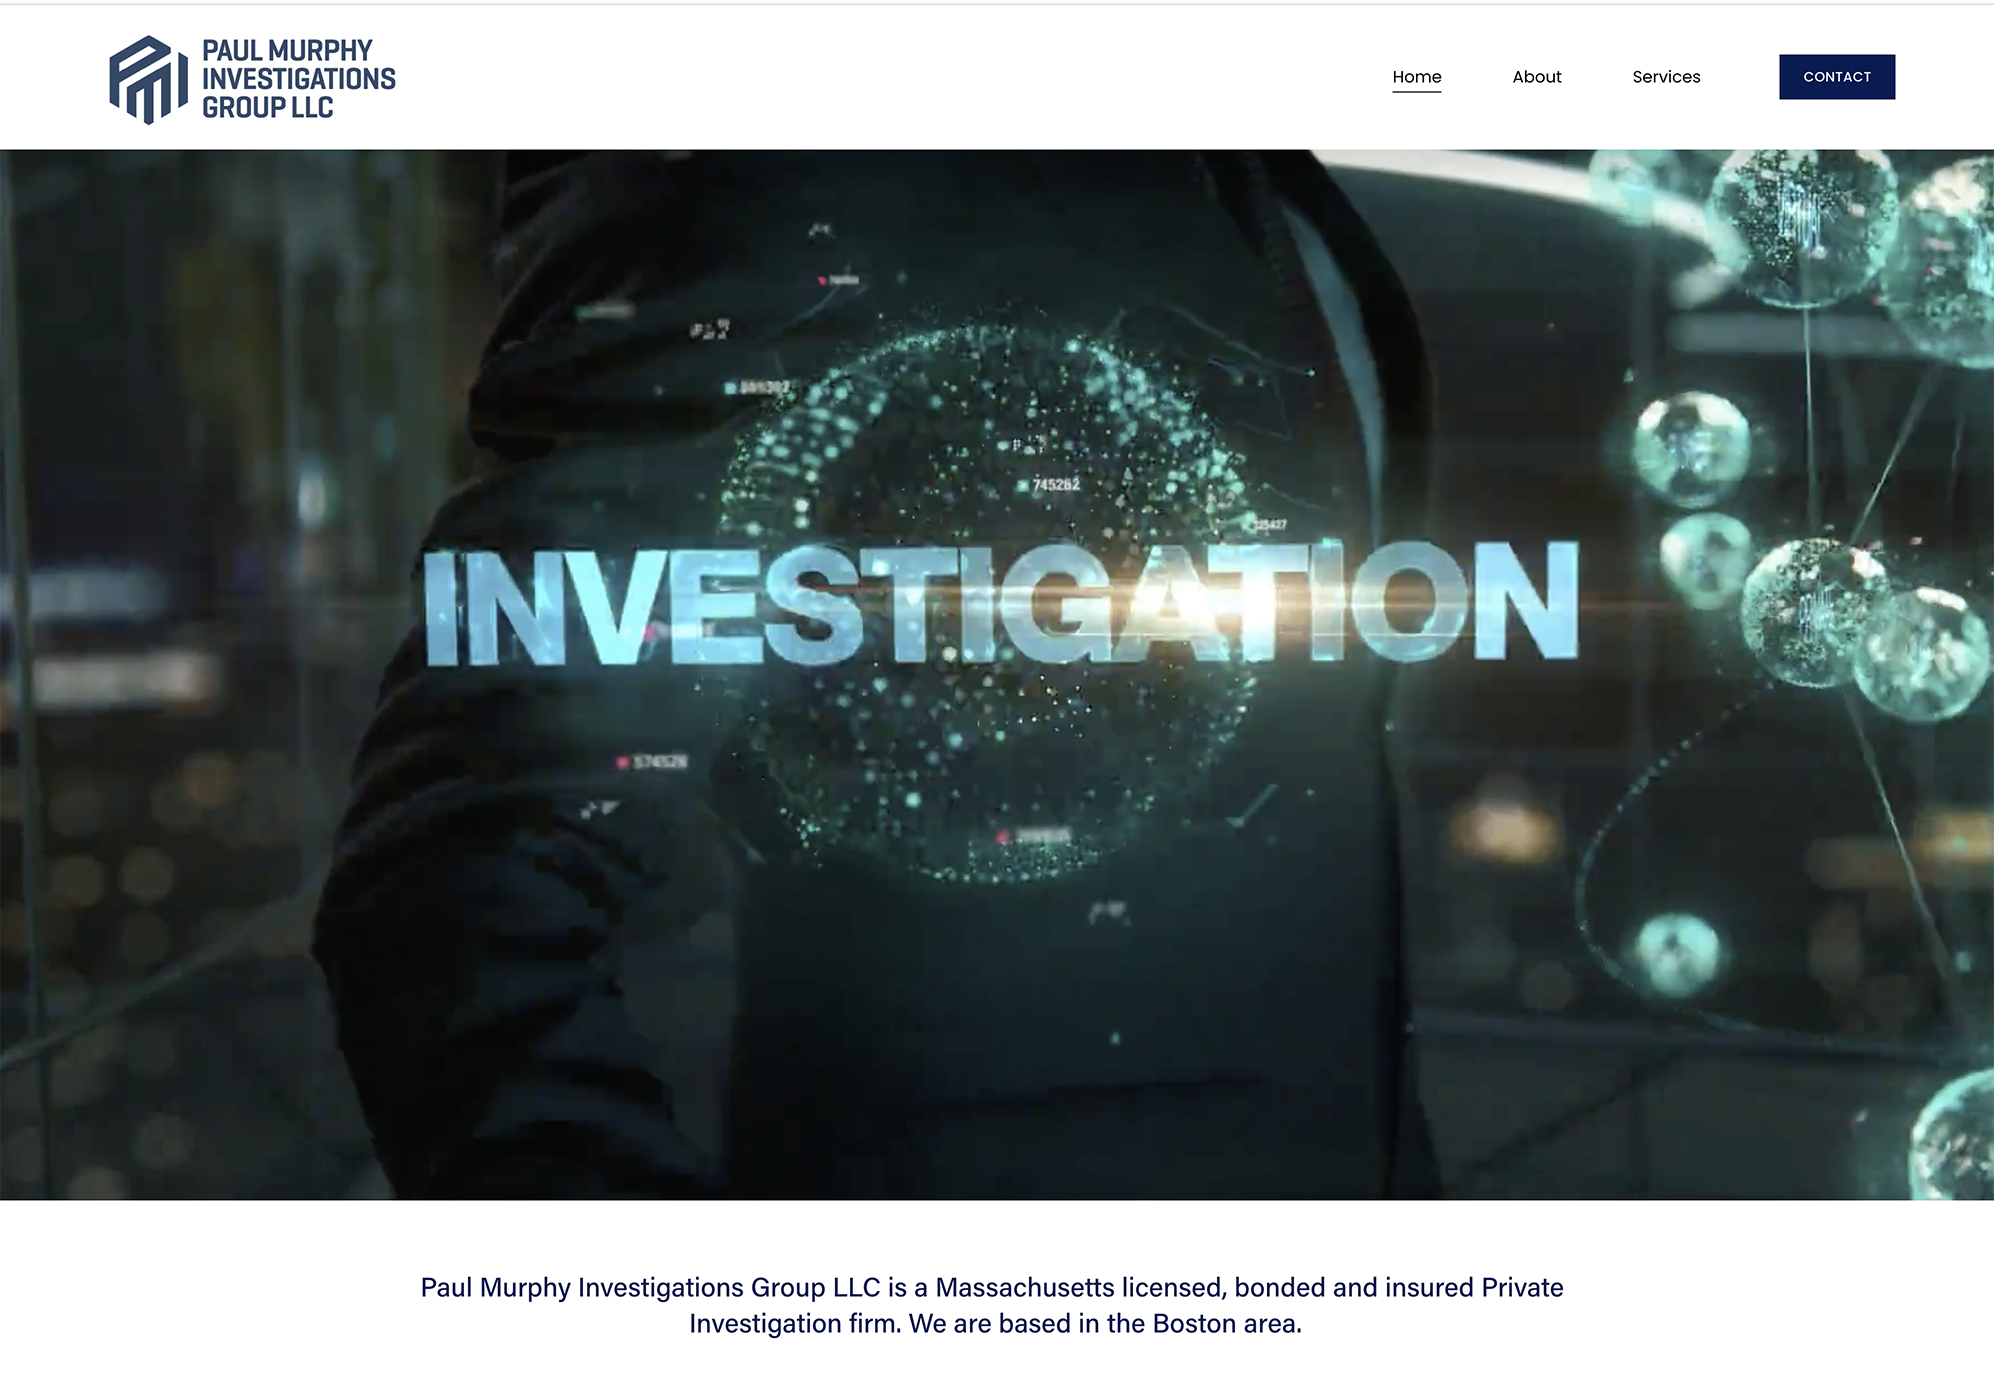 pmi investigtaions website.png